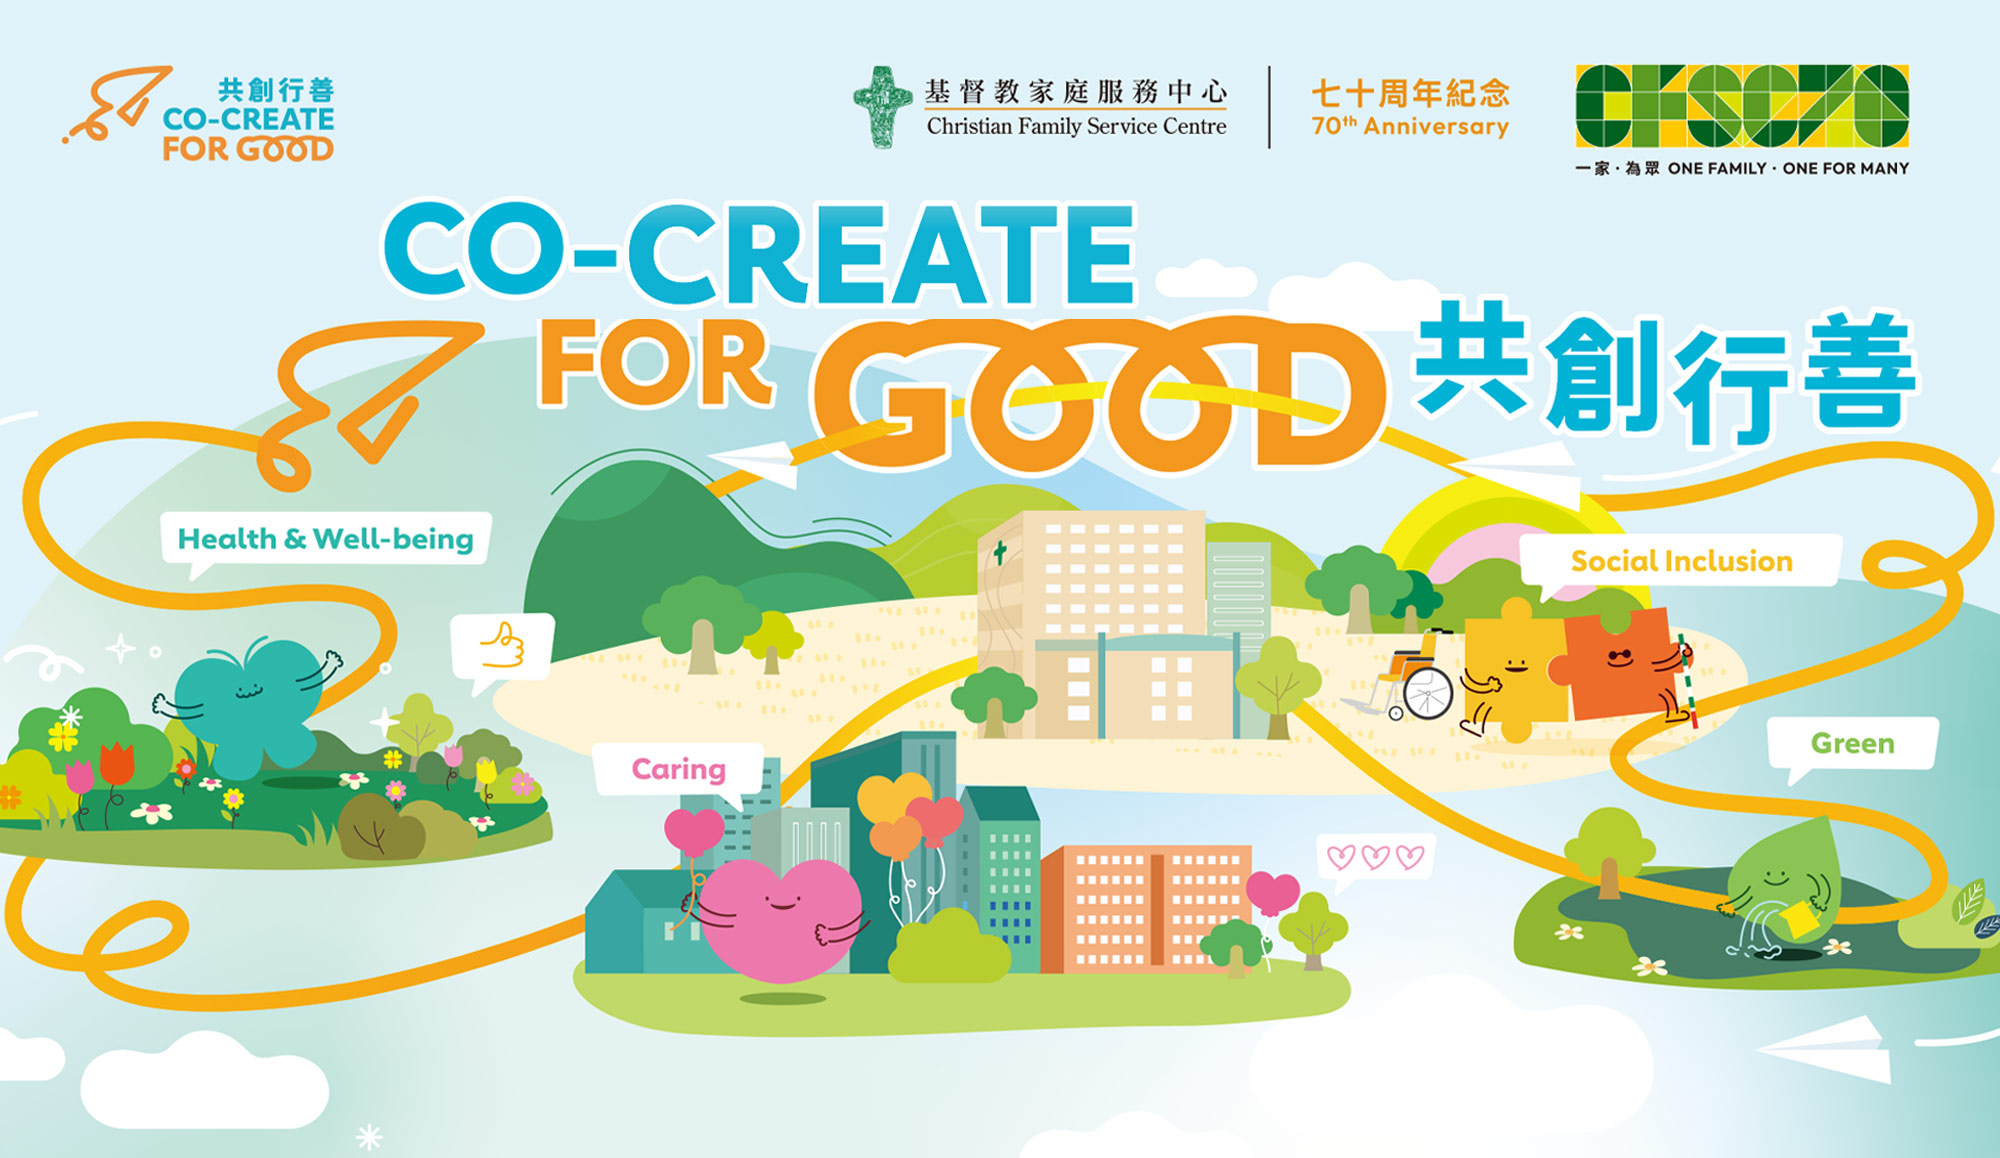 Cover Image - “Co-Create for Good” A brand-new corporate partnership program launched by CFSC